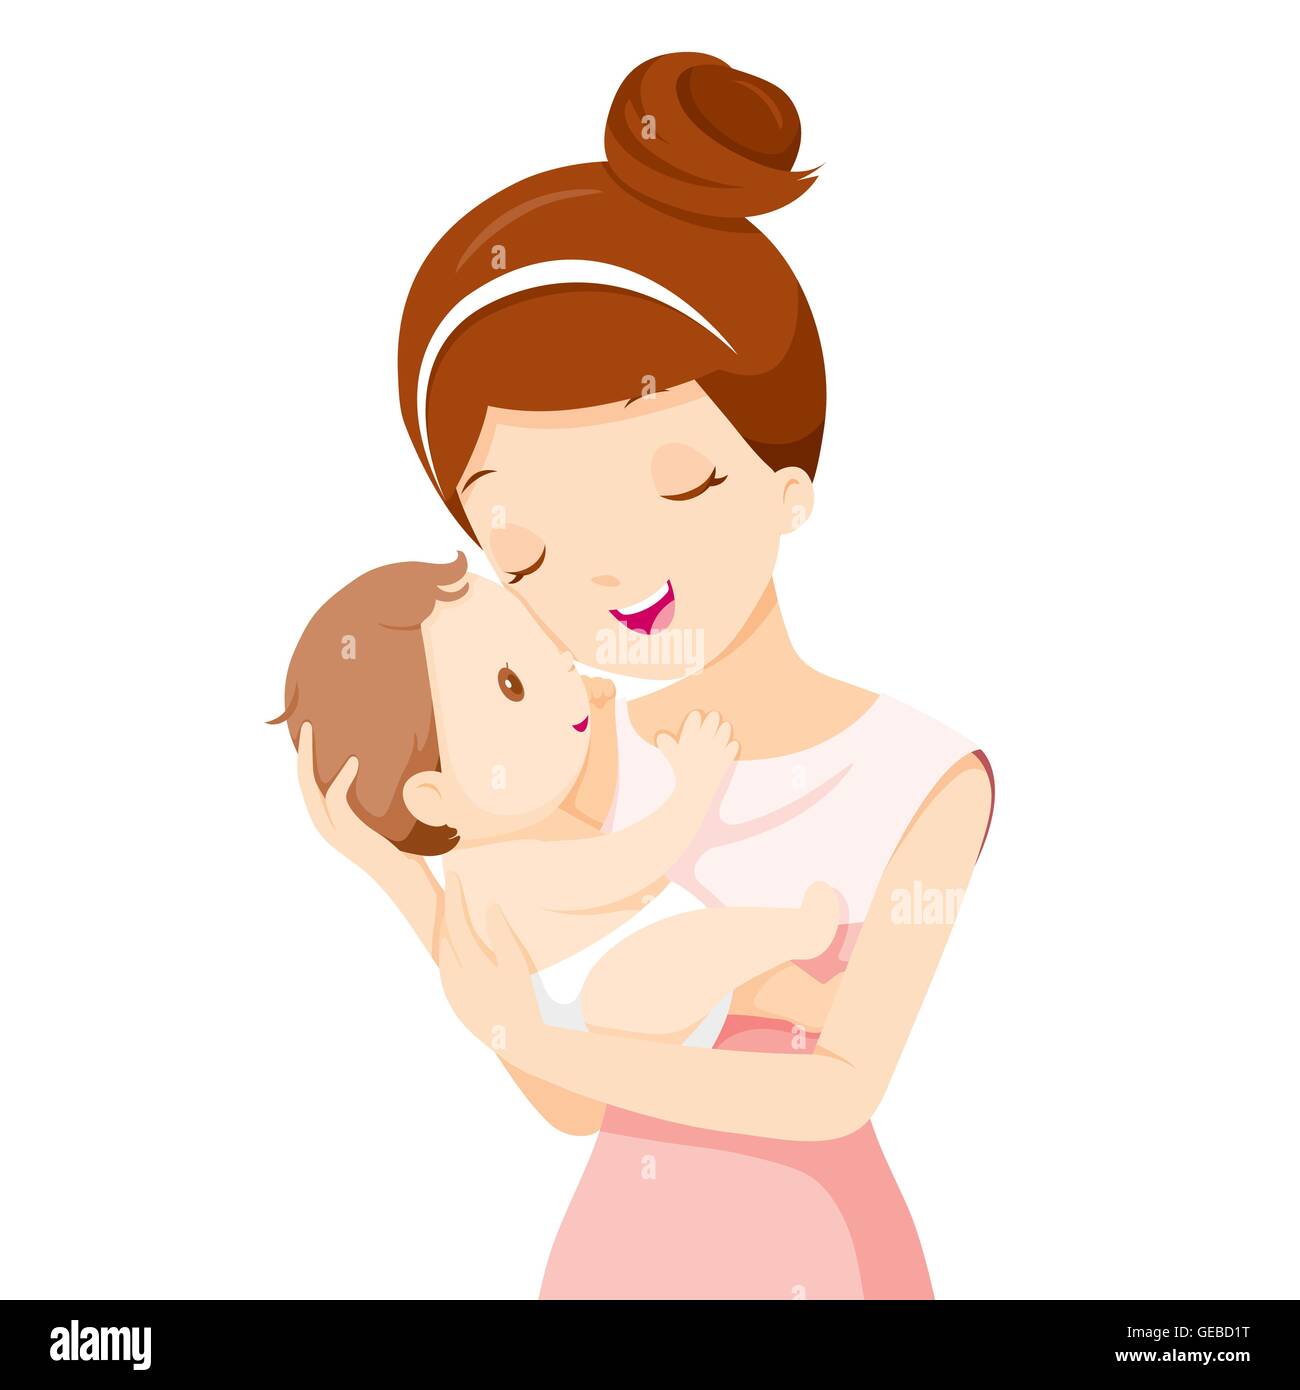 Baby In A Tender Embrace Of Mother, Mothers day, Infant, Motherhood, Love, Innocence Stock Vector